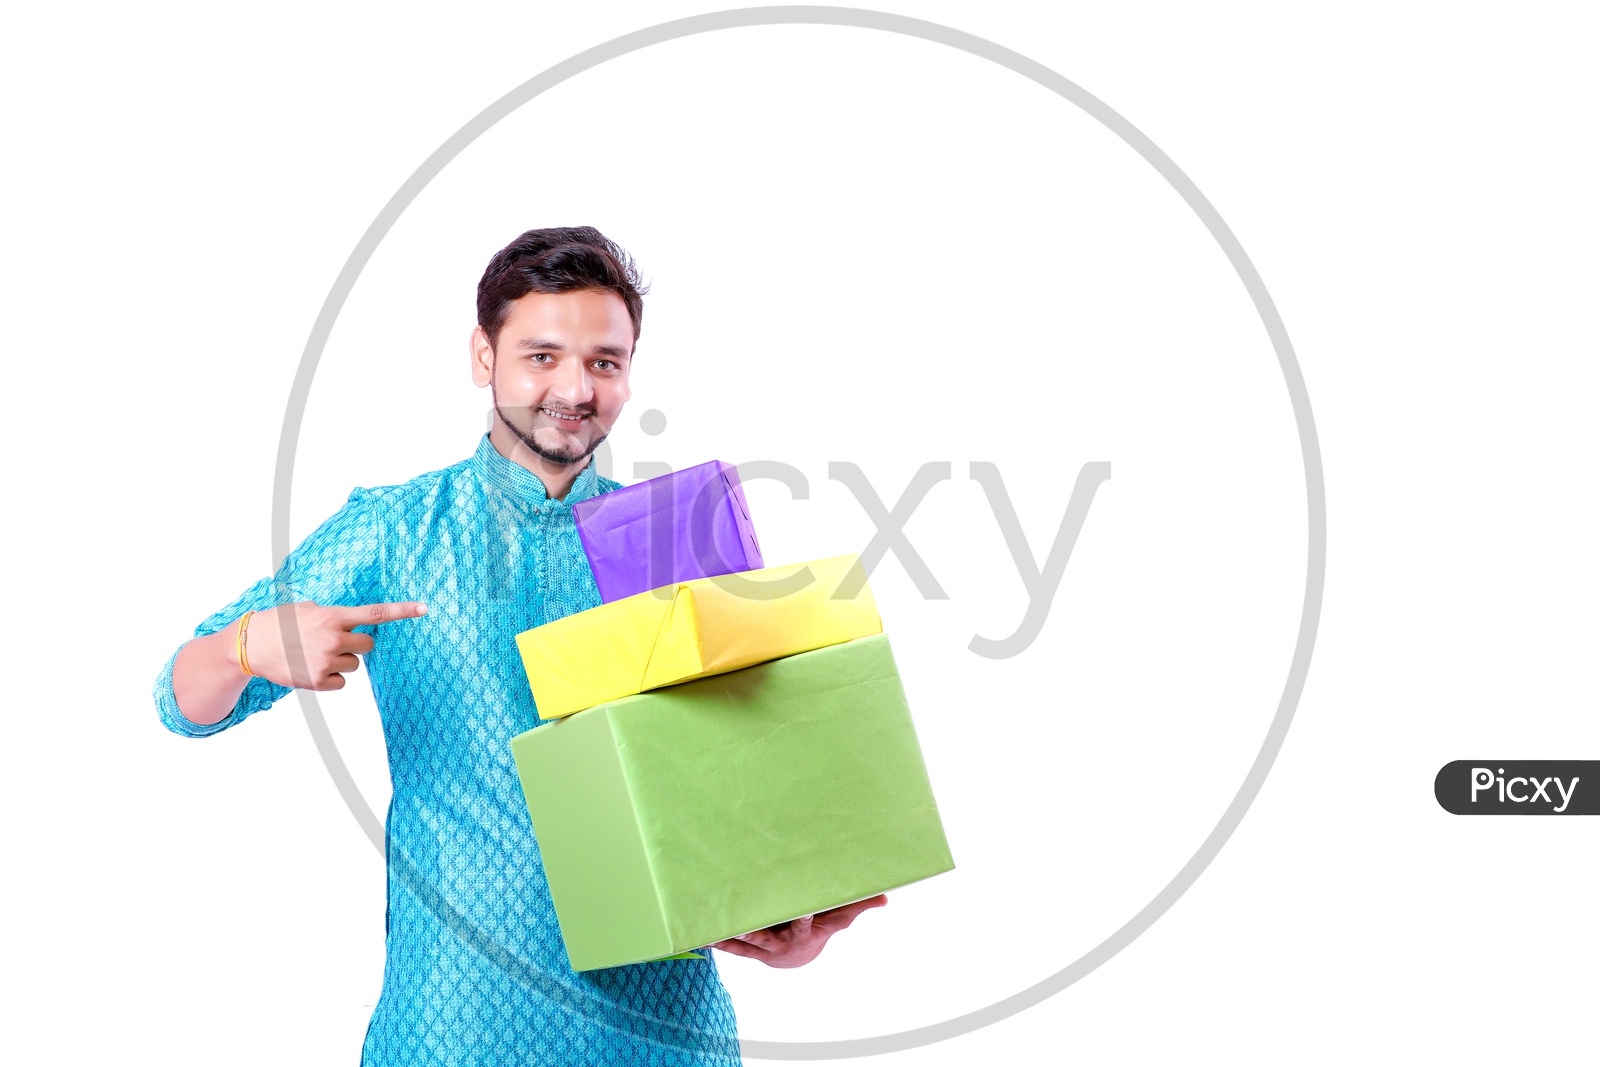 Portrait of a happy Indian Men pointing towards  gifts in hands  with white background